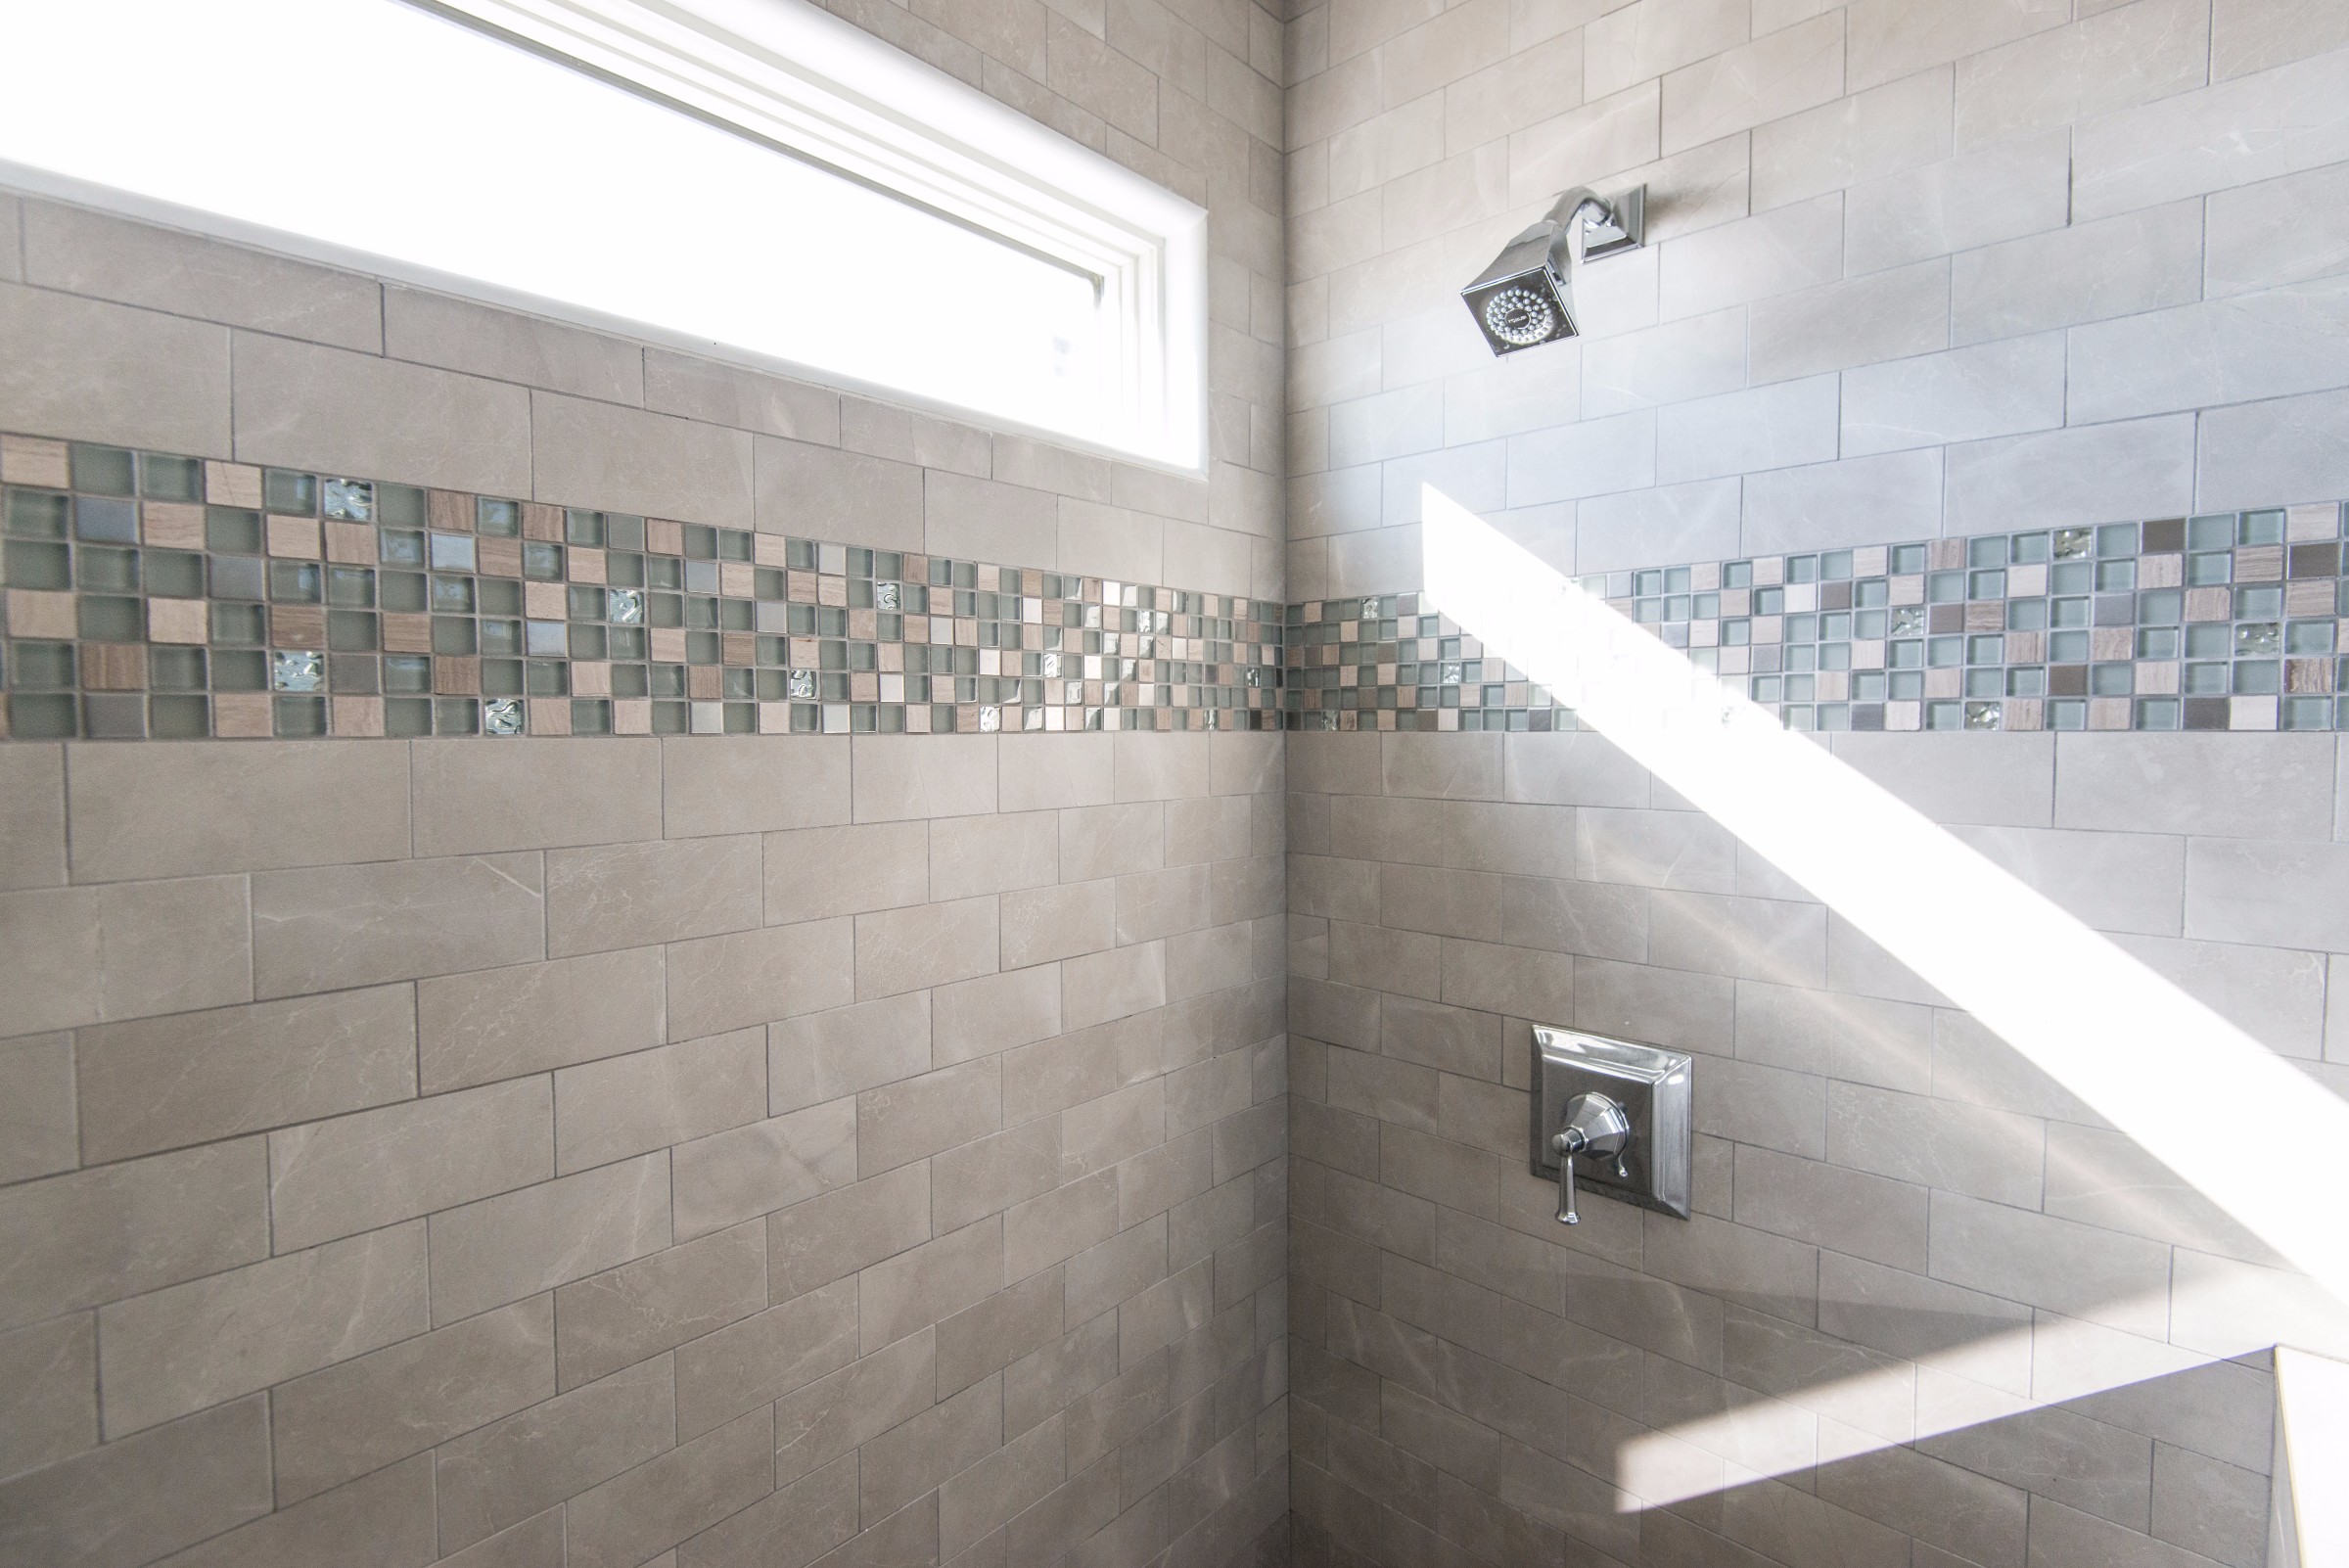 Bathroom Remodel in Kings Grant, Fenwick Island DE with Nordic Grey Wall Tiles, Decorative Glass Mosaic Tiles and Square Shower